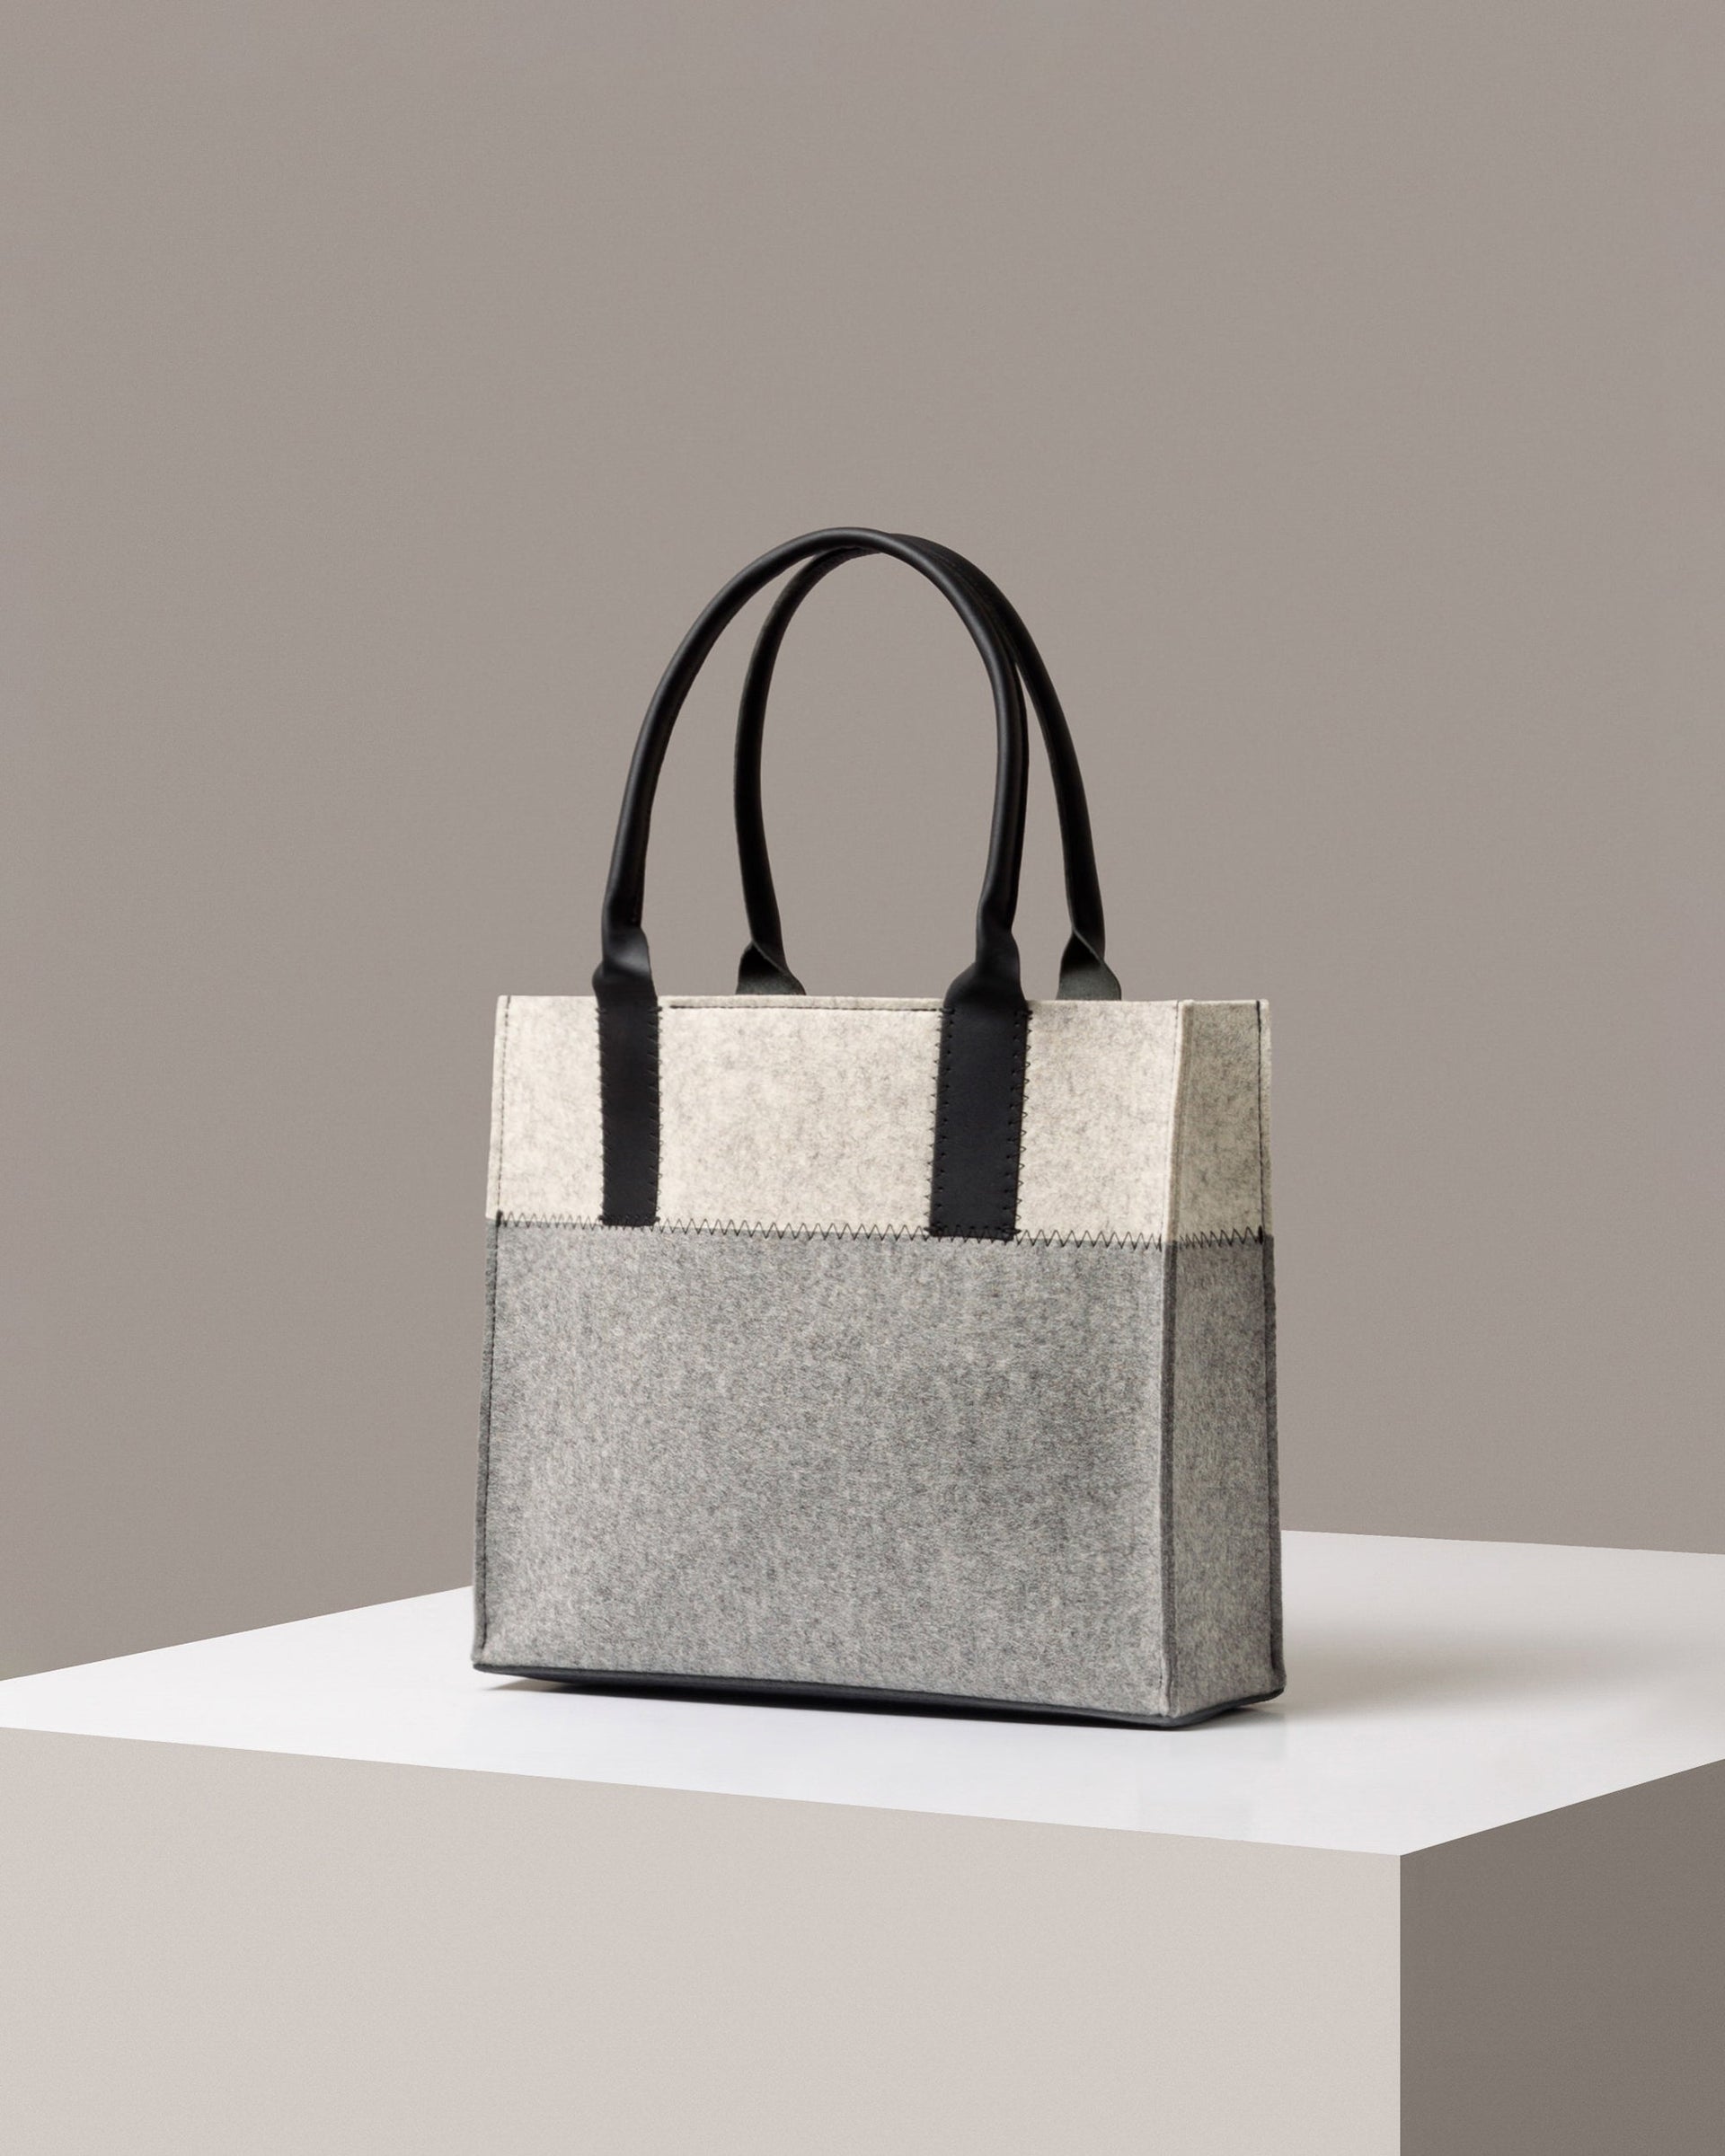 A stylish Jaunt Midi Merino Wool Felt Tote bag in white, gray, and black colors, displayed in a three-quarter view on a white base